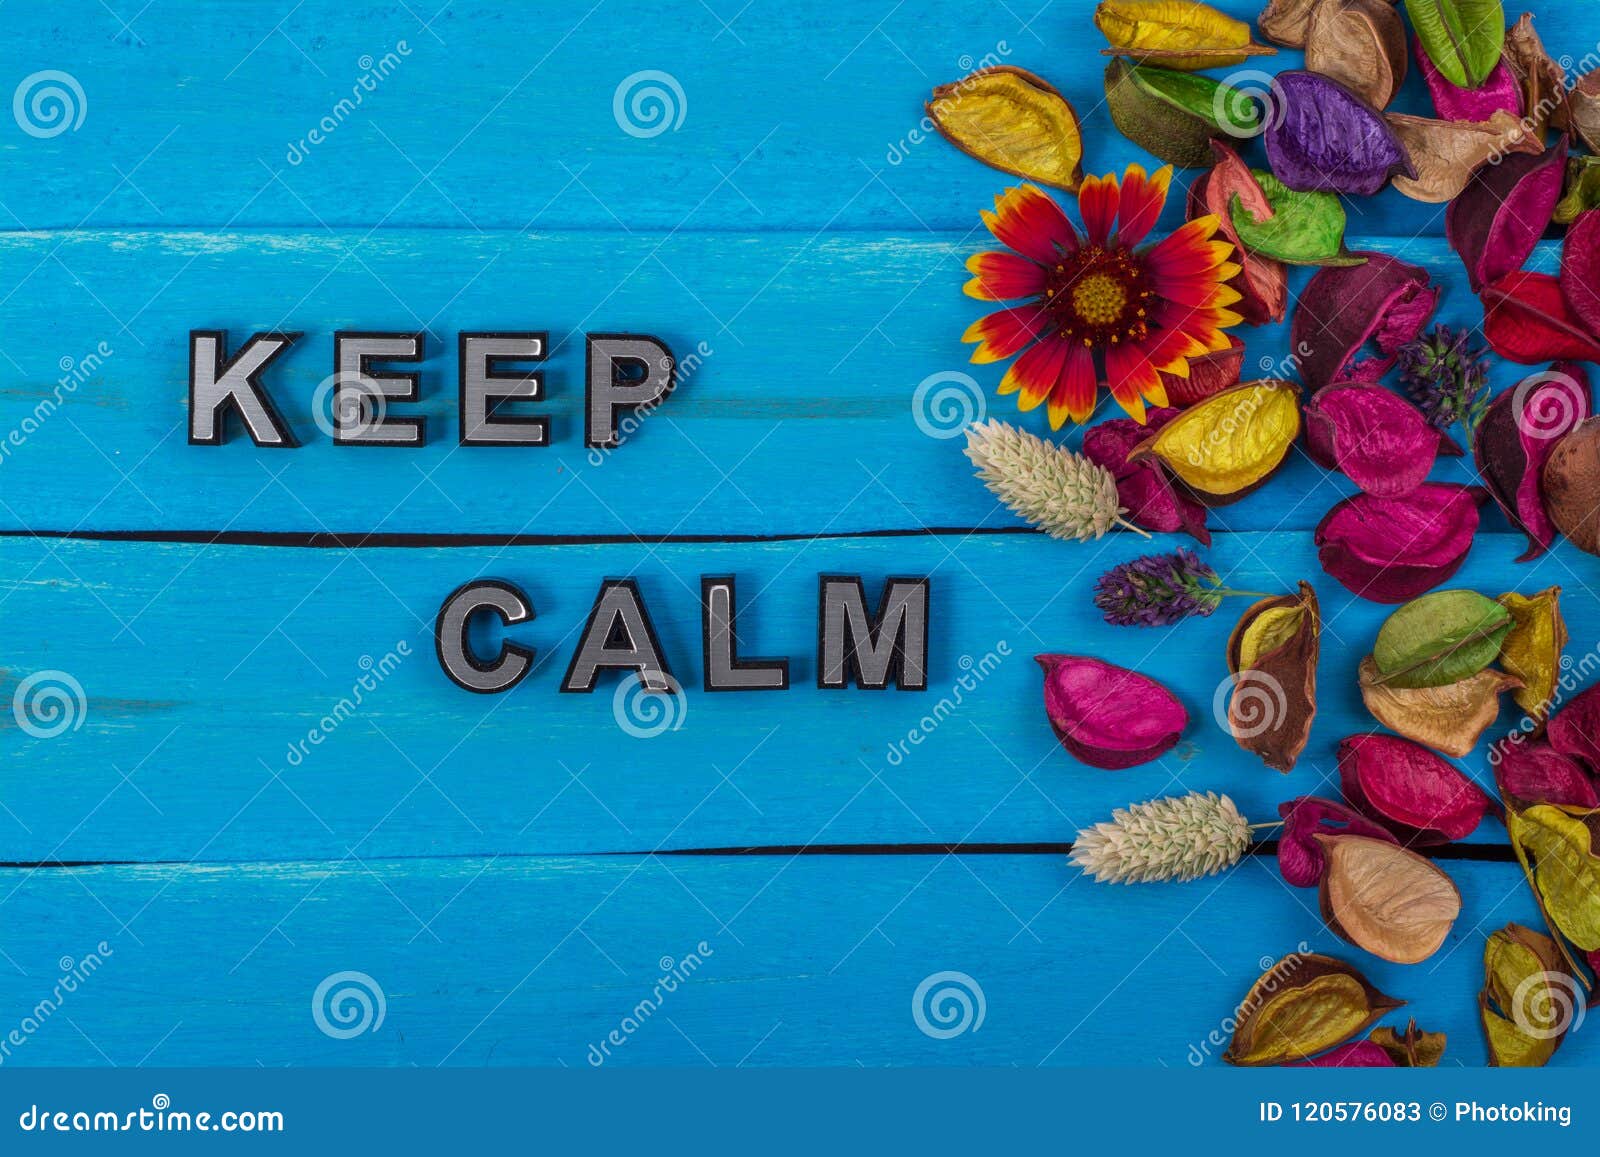 keep calm text on blue wood with flower